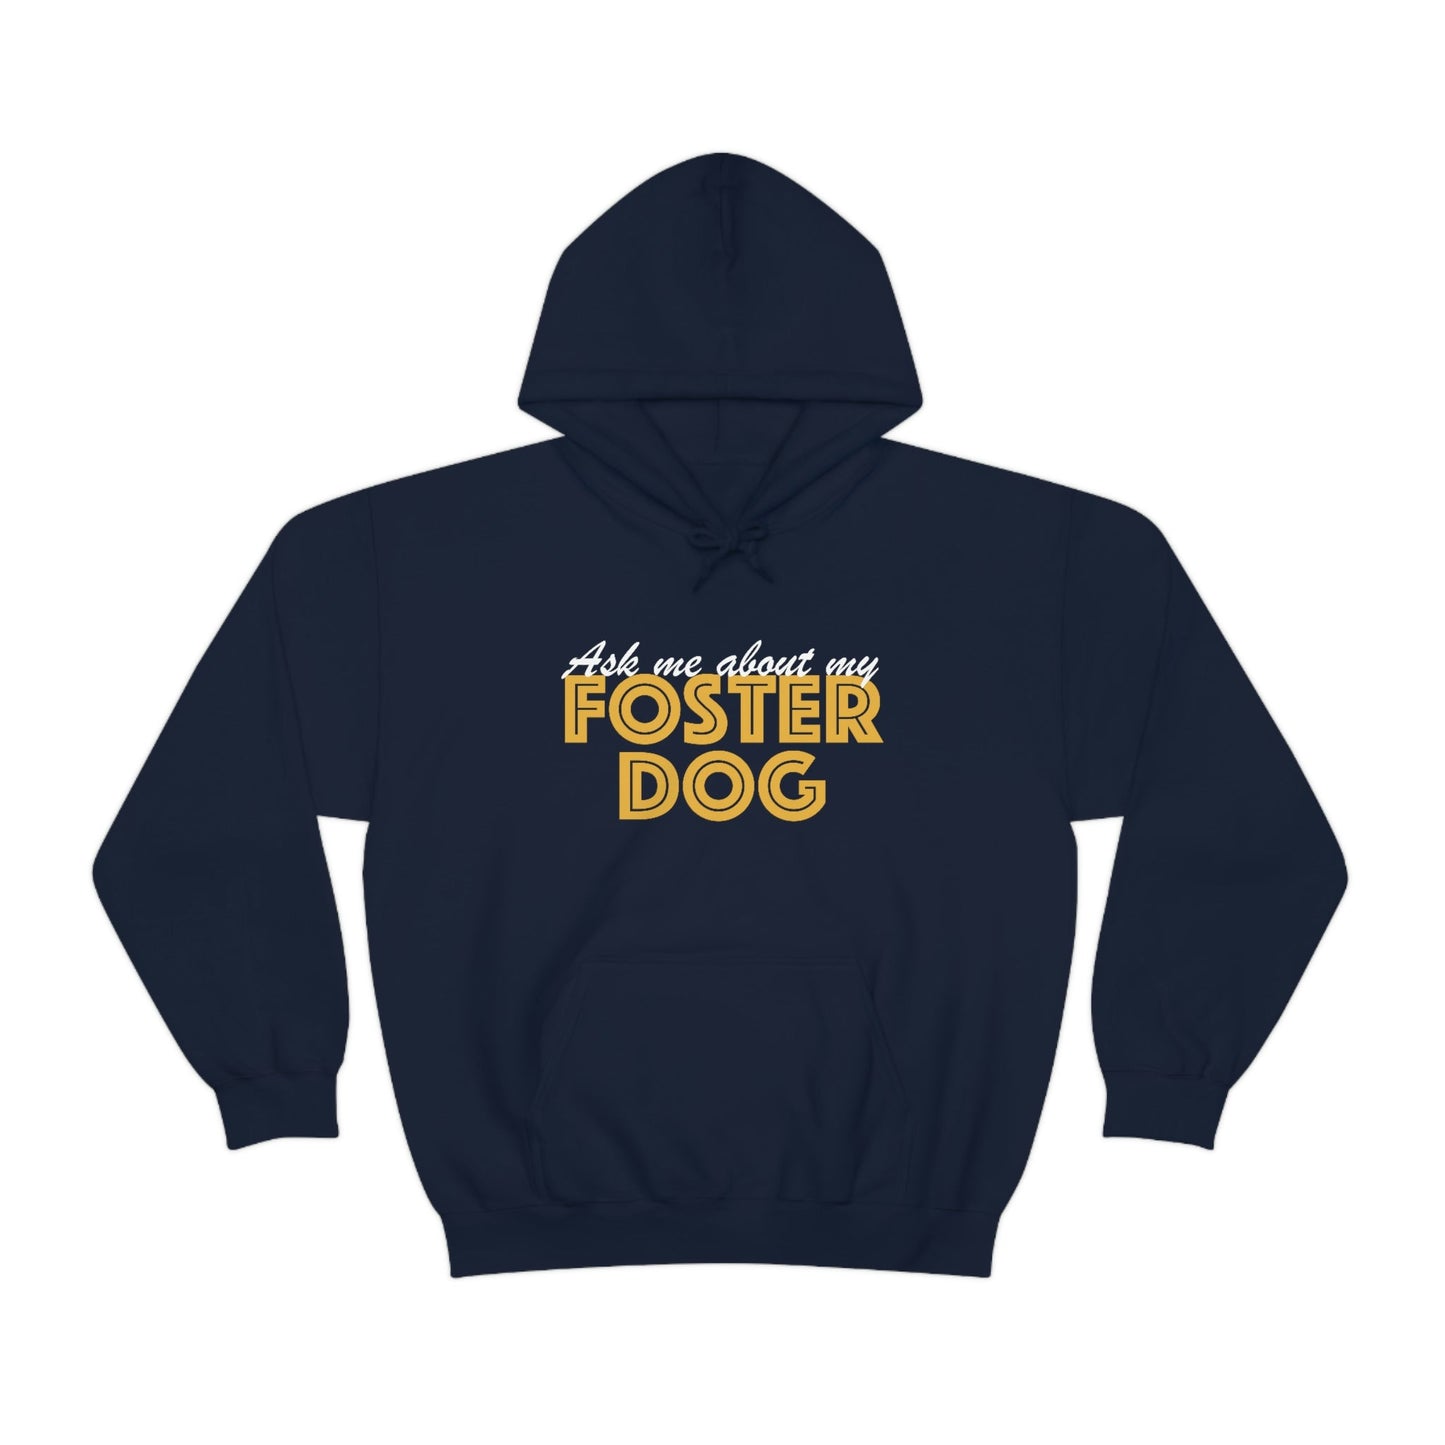 Ask Me About My Foster Dog | Hooded Sweatshirt - Detezi Designs-16624737380389890341